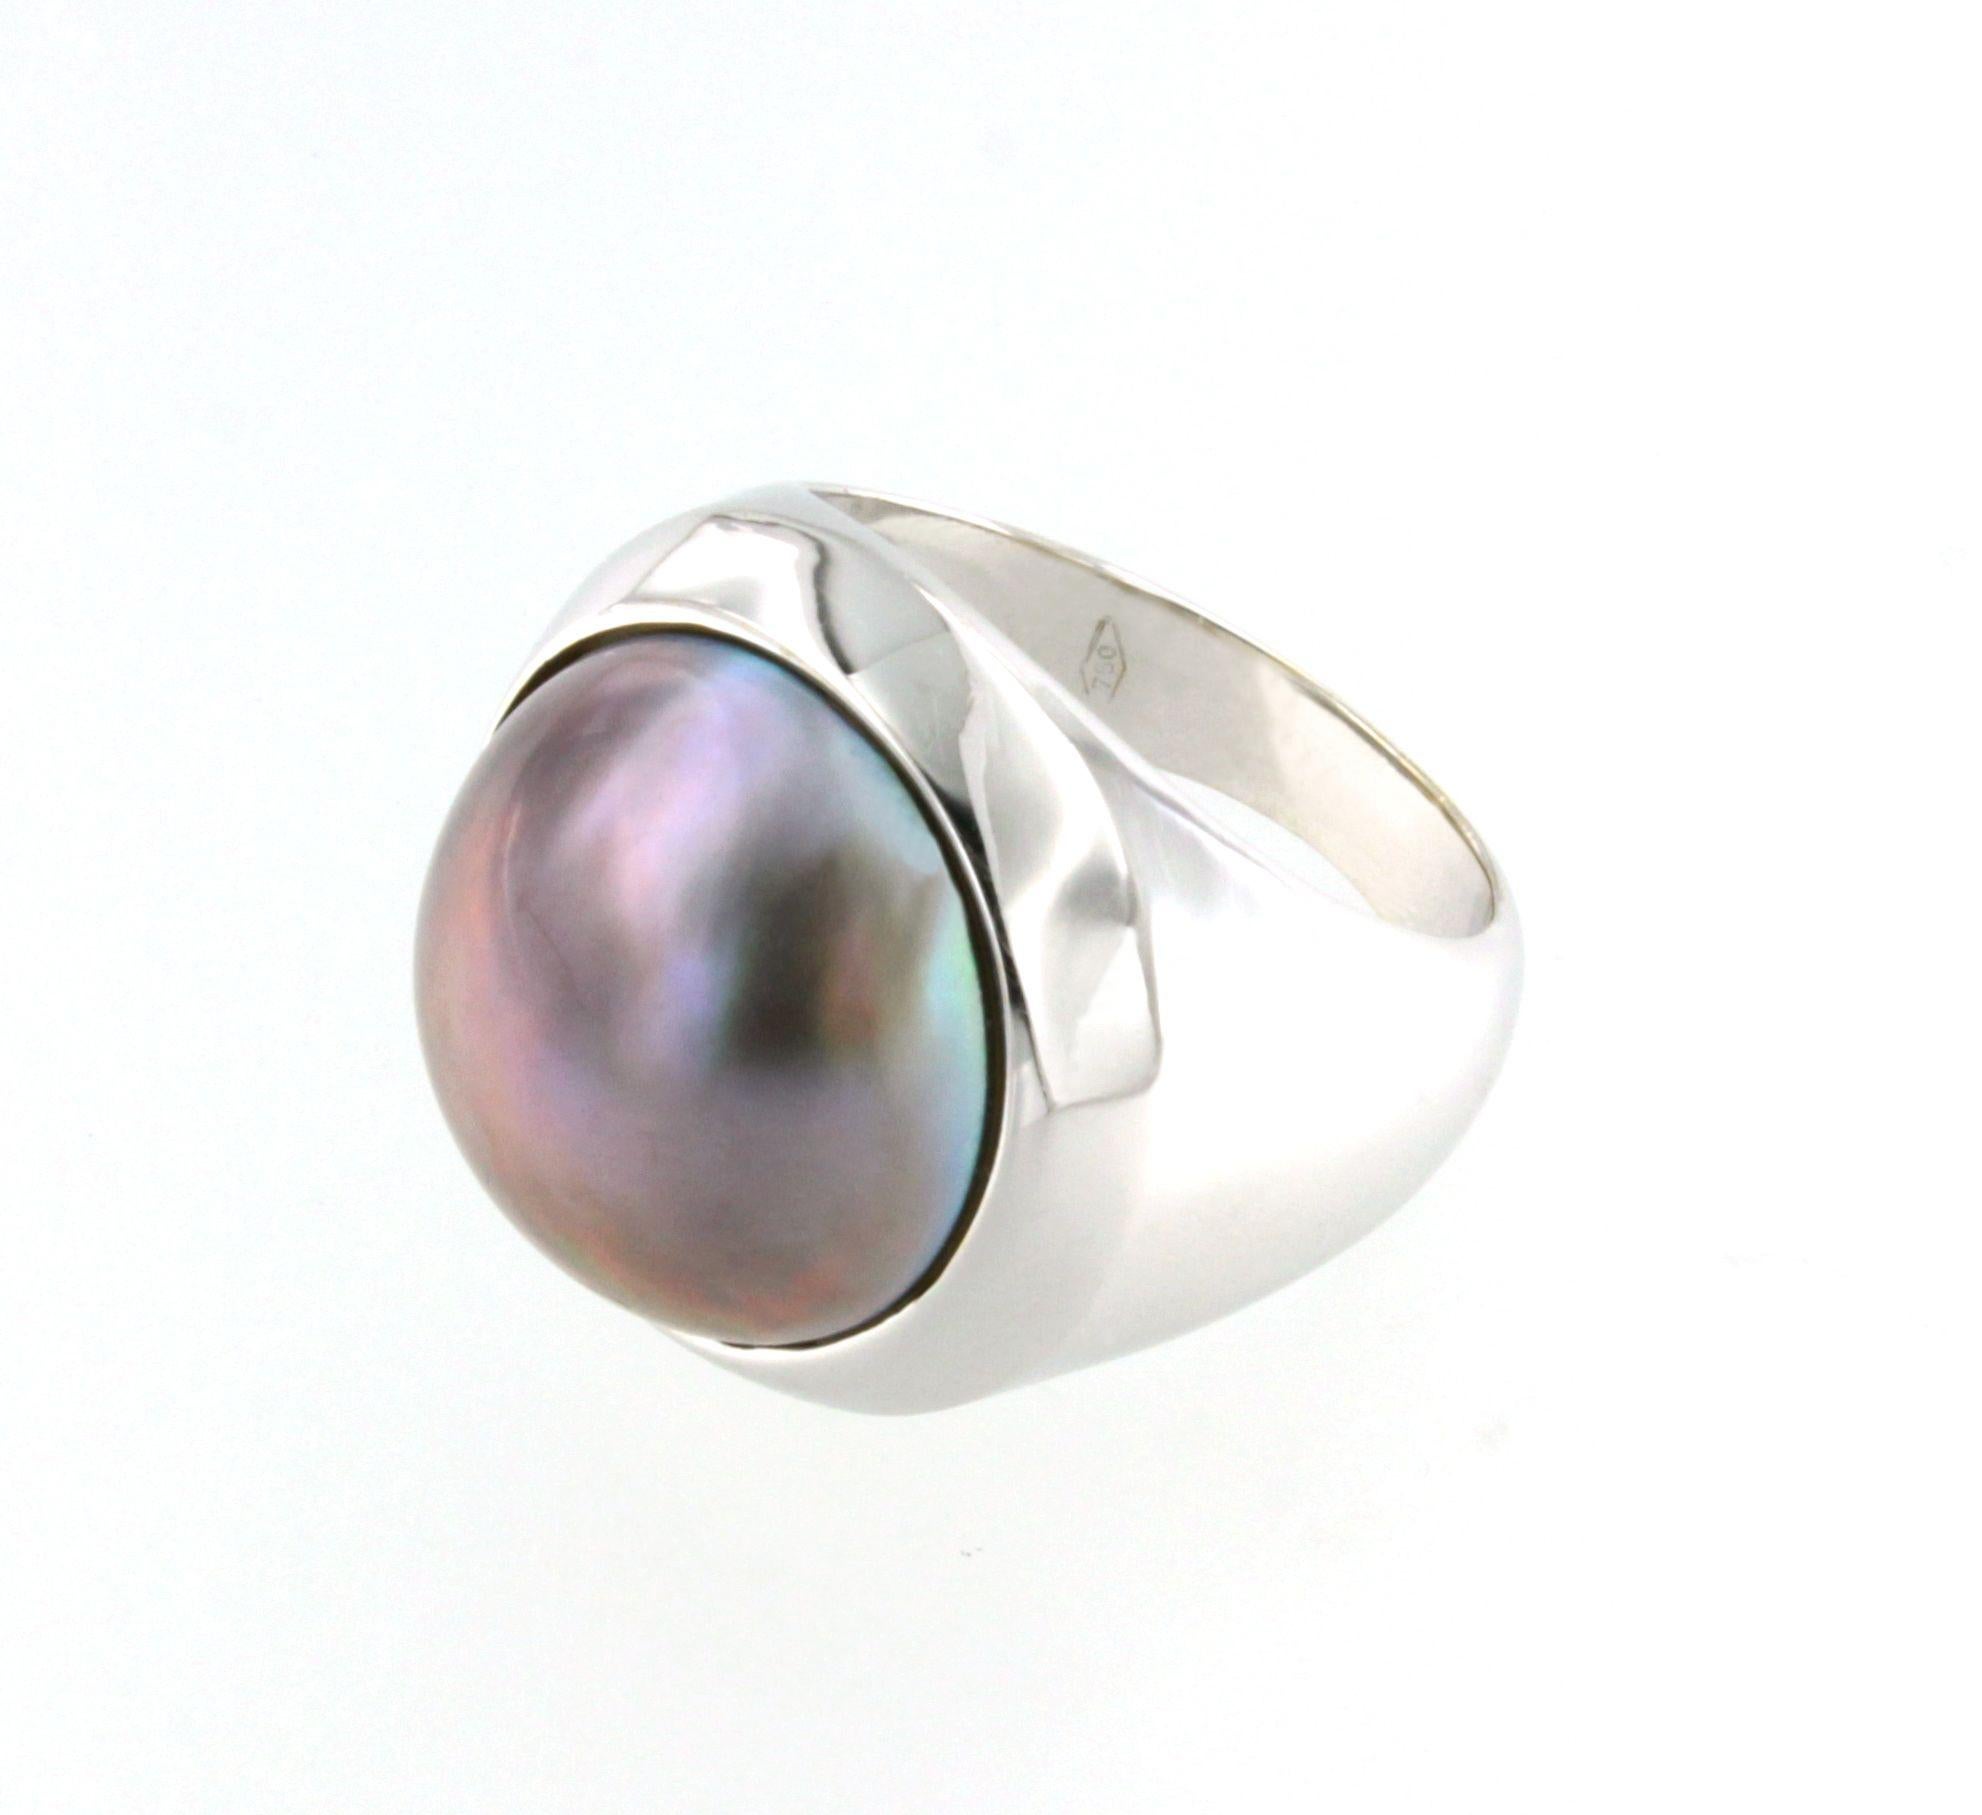 Very amazing ring in white gold 18kt  with  Mabè (Blach Pearl and mother of pearl)  handemade in Italy by Stanoppi Jewellery since 1948.
g. 10.80

Size of Ring : EU 10   - 49

All Stanoppi Jewelry is new and has never been previously owned or worn.